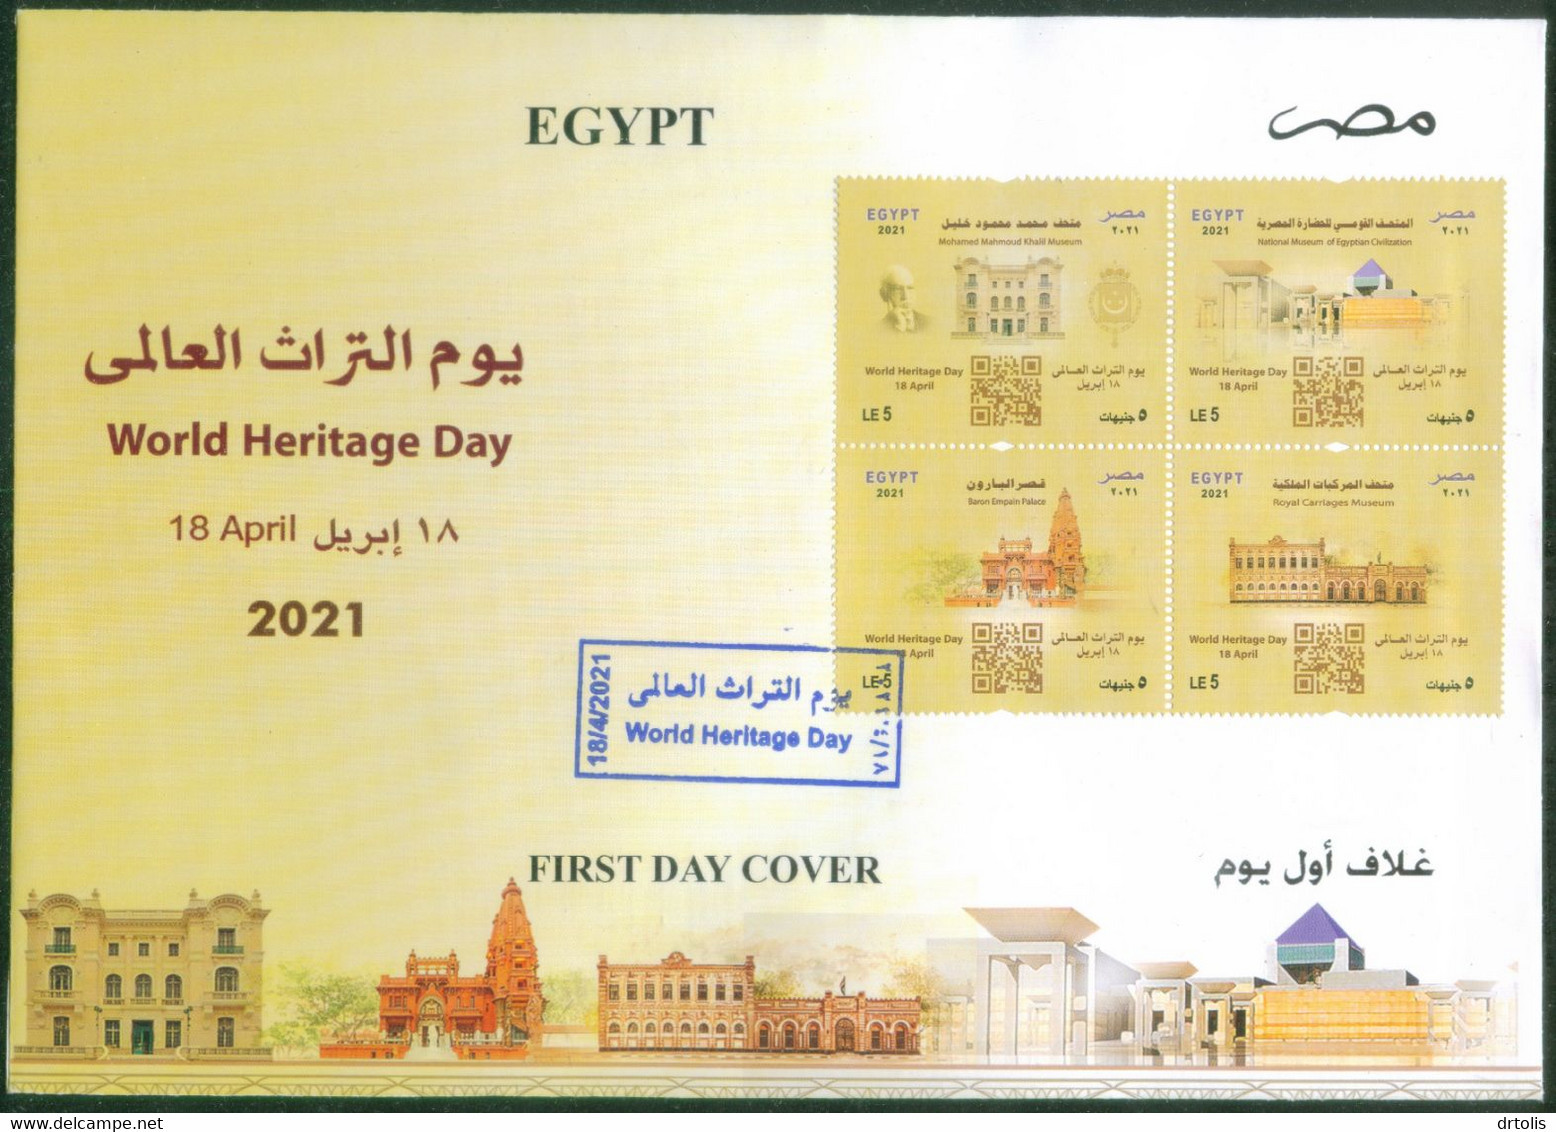 EGYPT / 2021 / BELGIUM / BARON EMPAIN PALACE / UN / WORLD HERITAGE DAY / ARCHEOLOGY / FDC - Covers & Documents